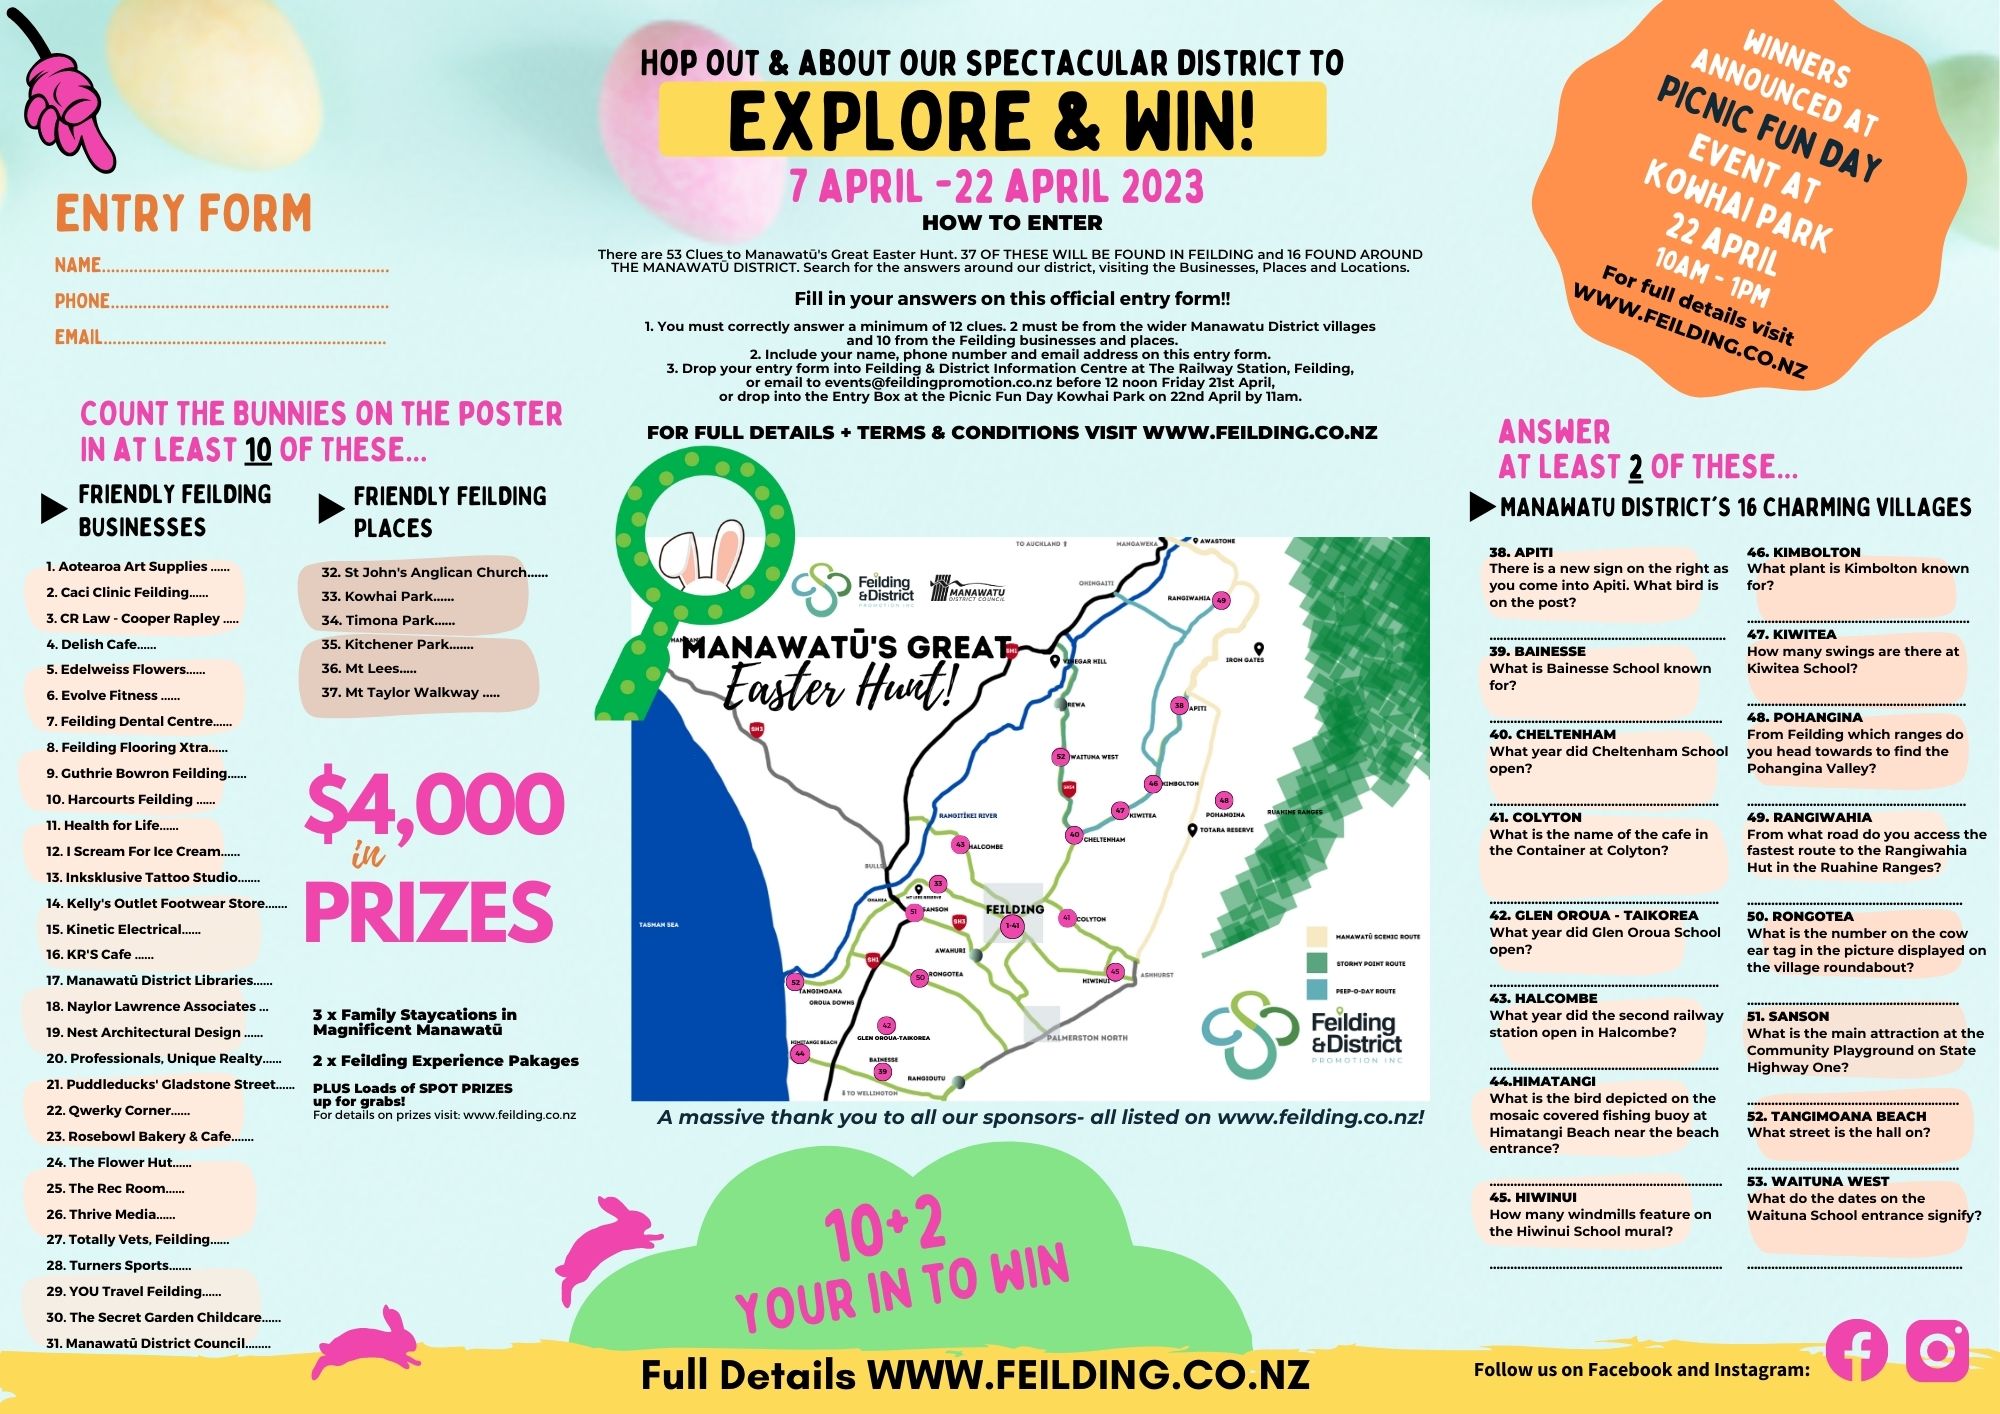 ENTRY FORM MANAWATUS GREAT EASTER HUNT